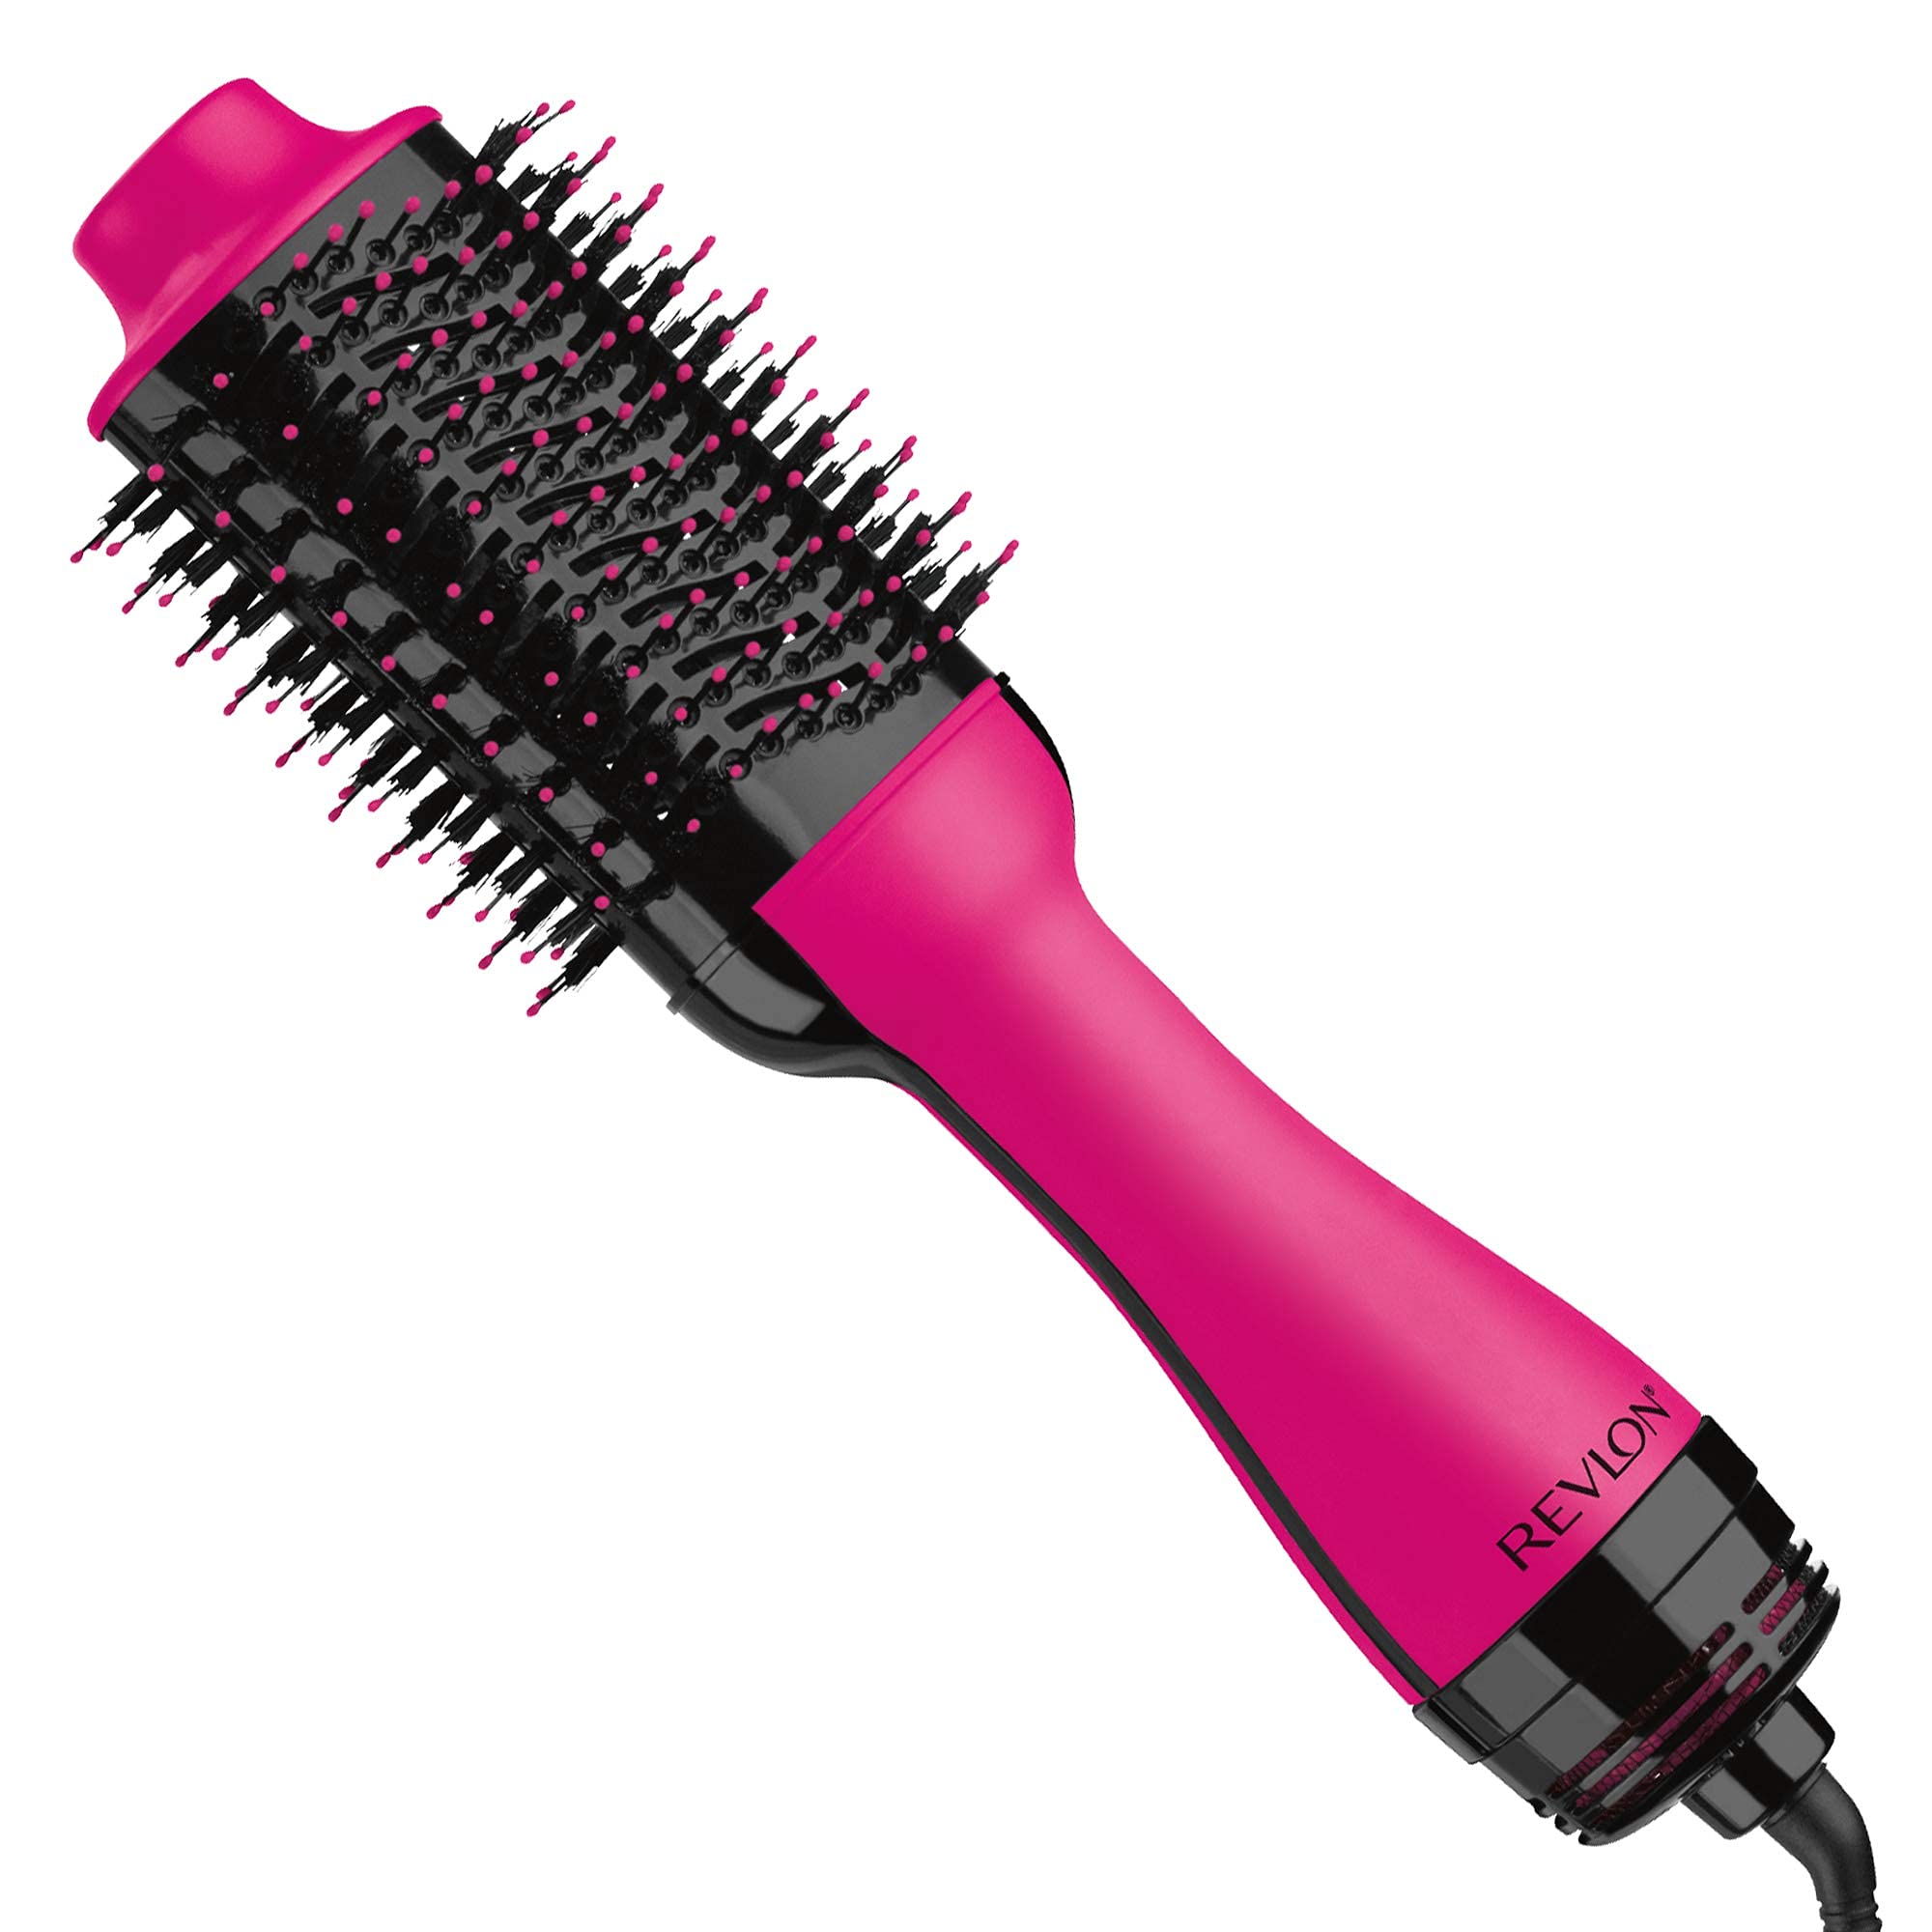 Revlon Salon One-Step hair dryer and Volumiser - New Pink Edition (One-Step, 2-in-1 styling tool, IONIC and CERAMIC technology, unique oval design, for mid to long hair) RVDR5222PUK